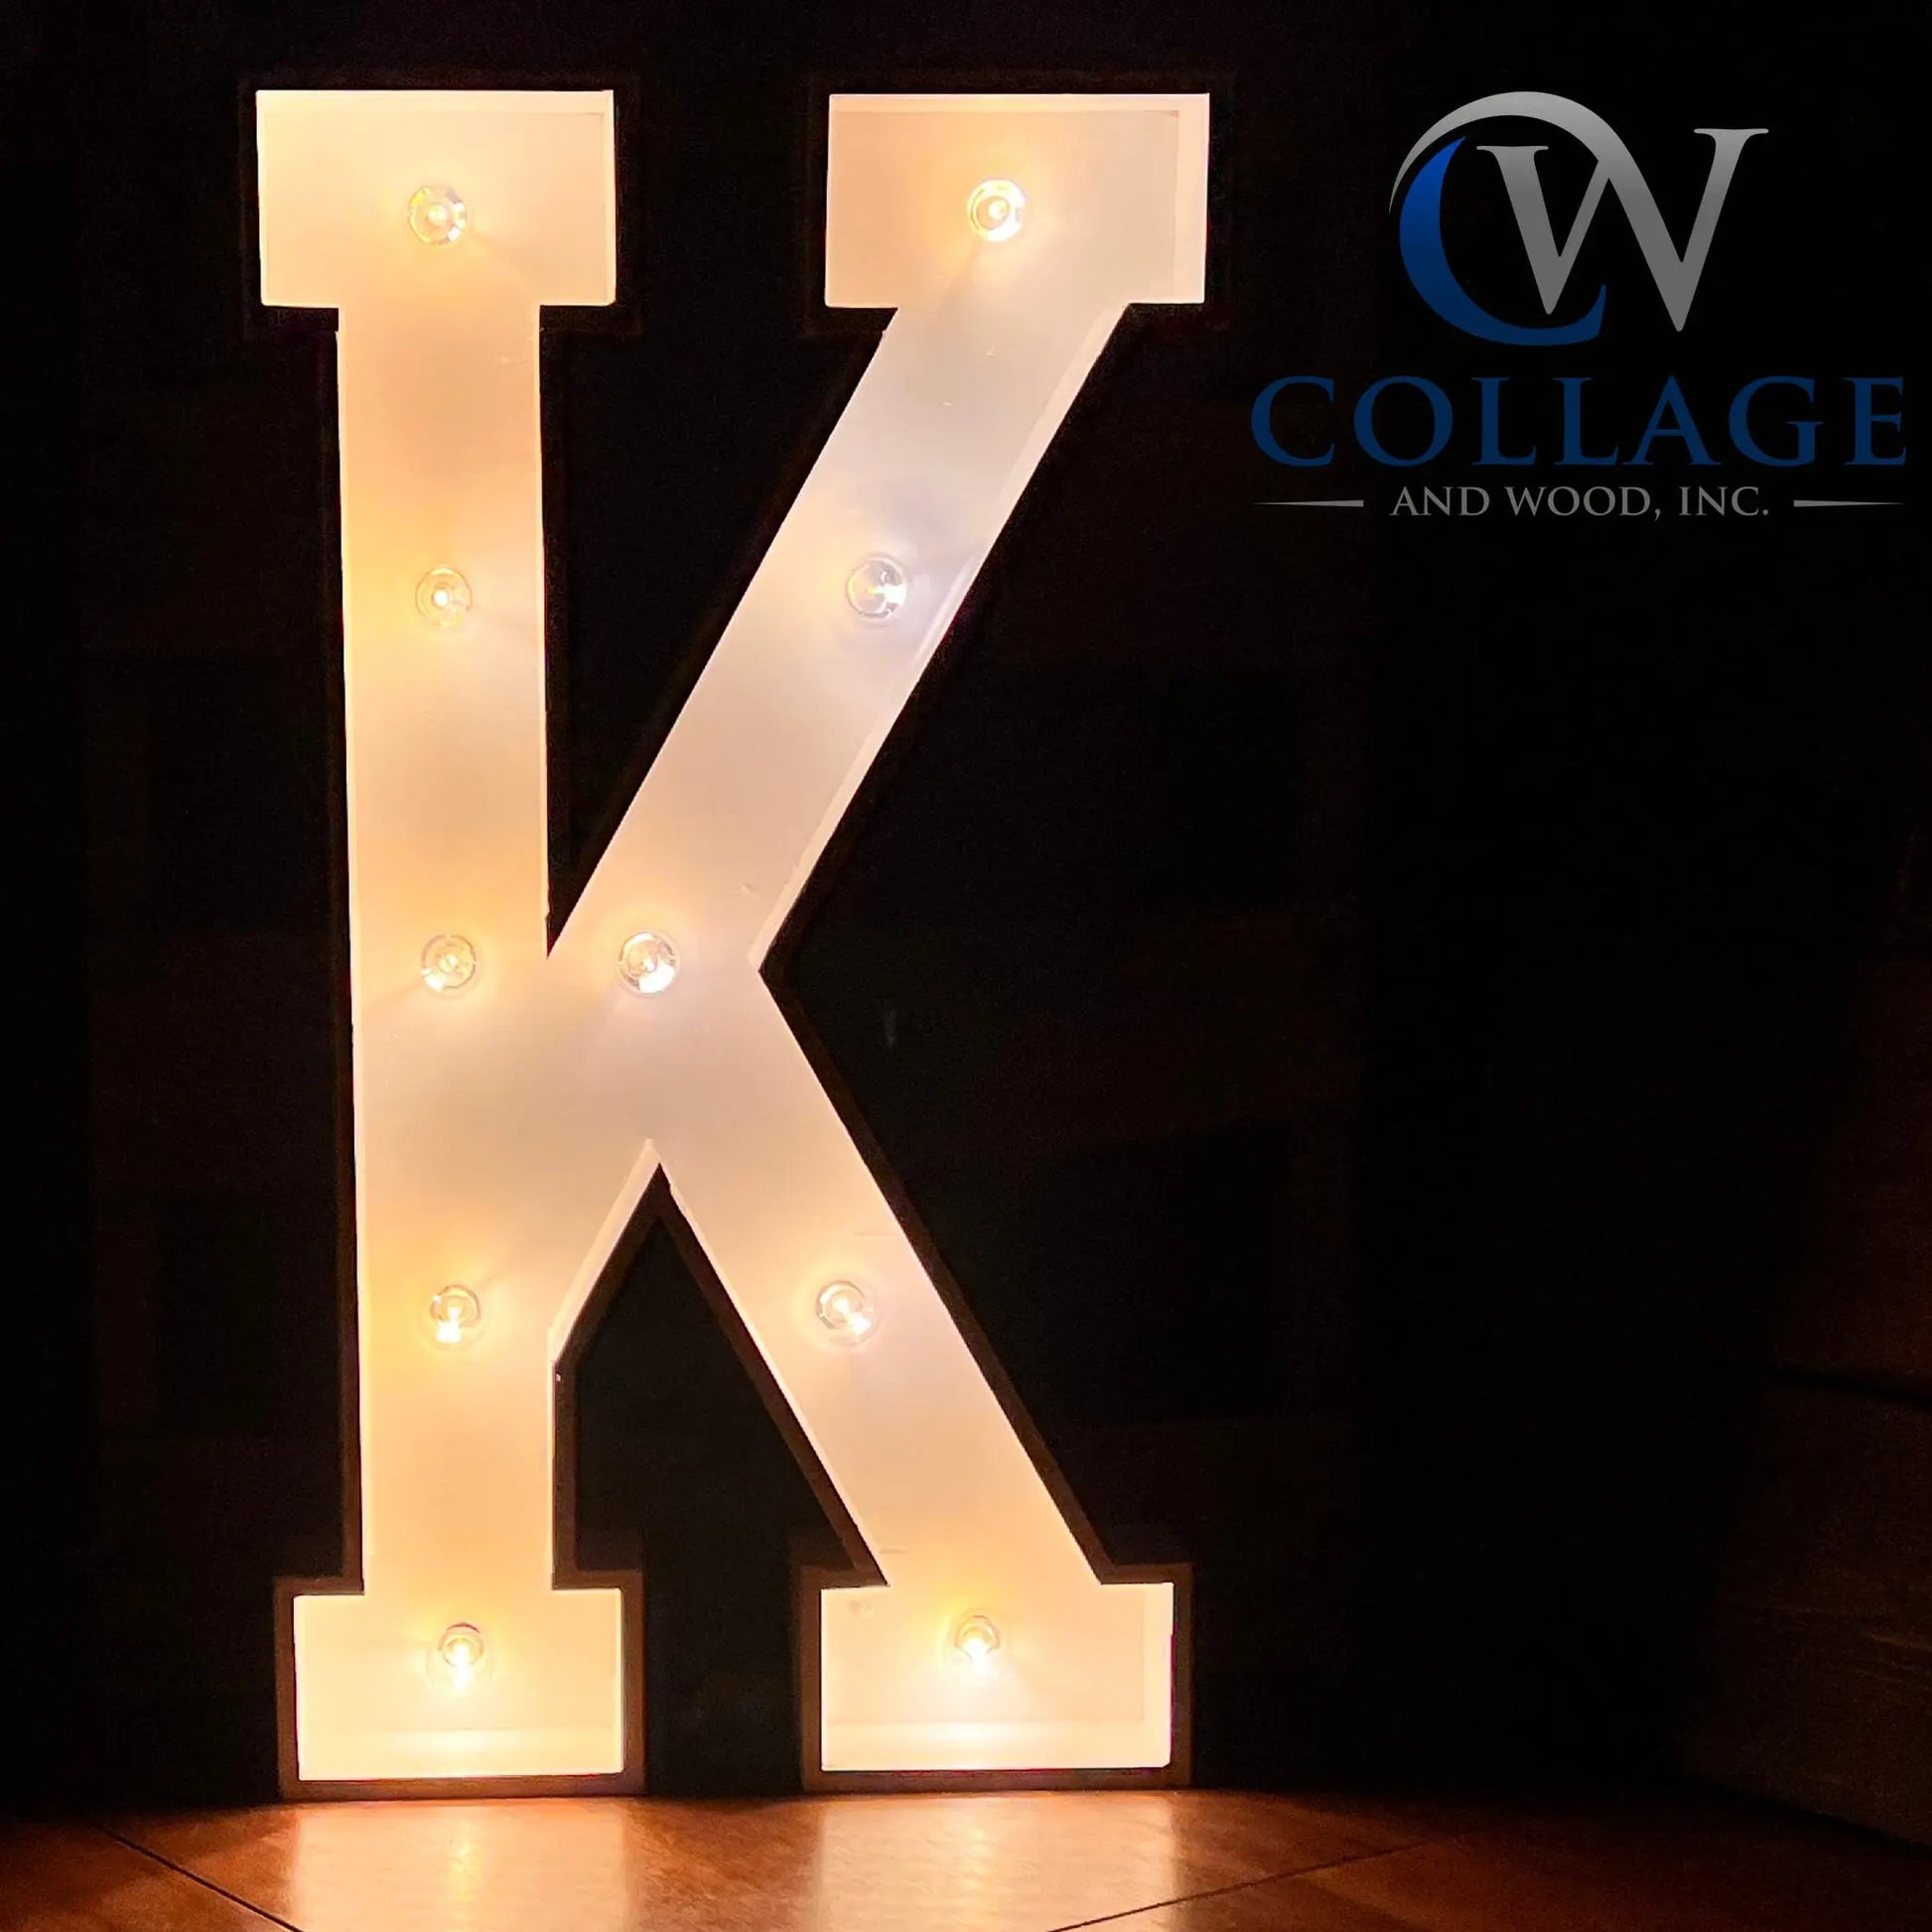 Kingly 3-foot tall wooden marquee letter K, classically painted in white, sparked to life by vibrant battery-powered LED lights.